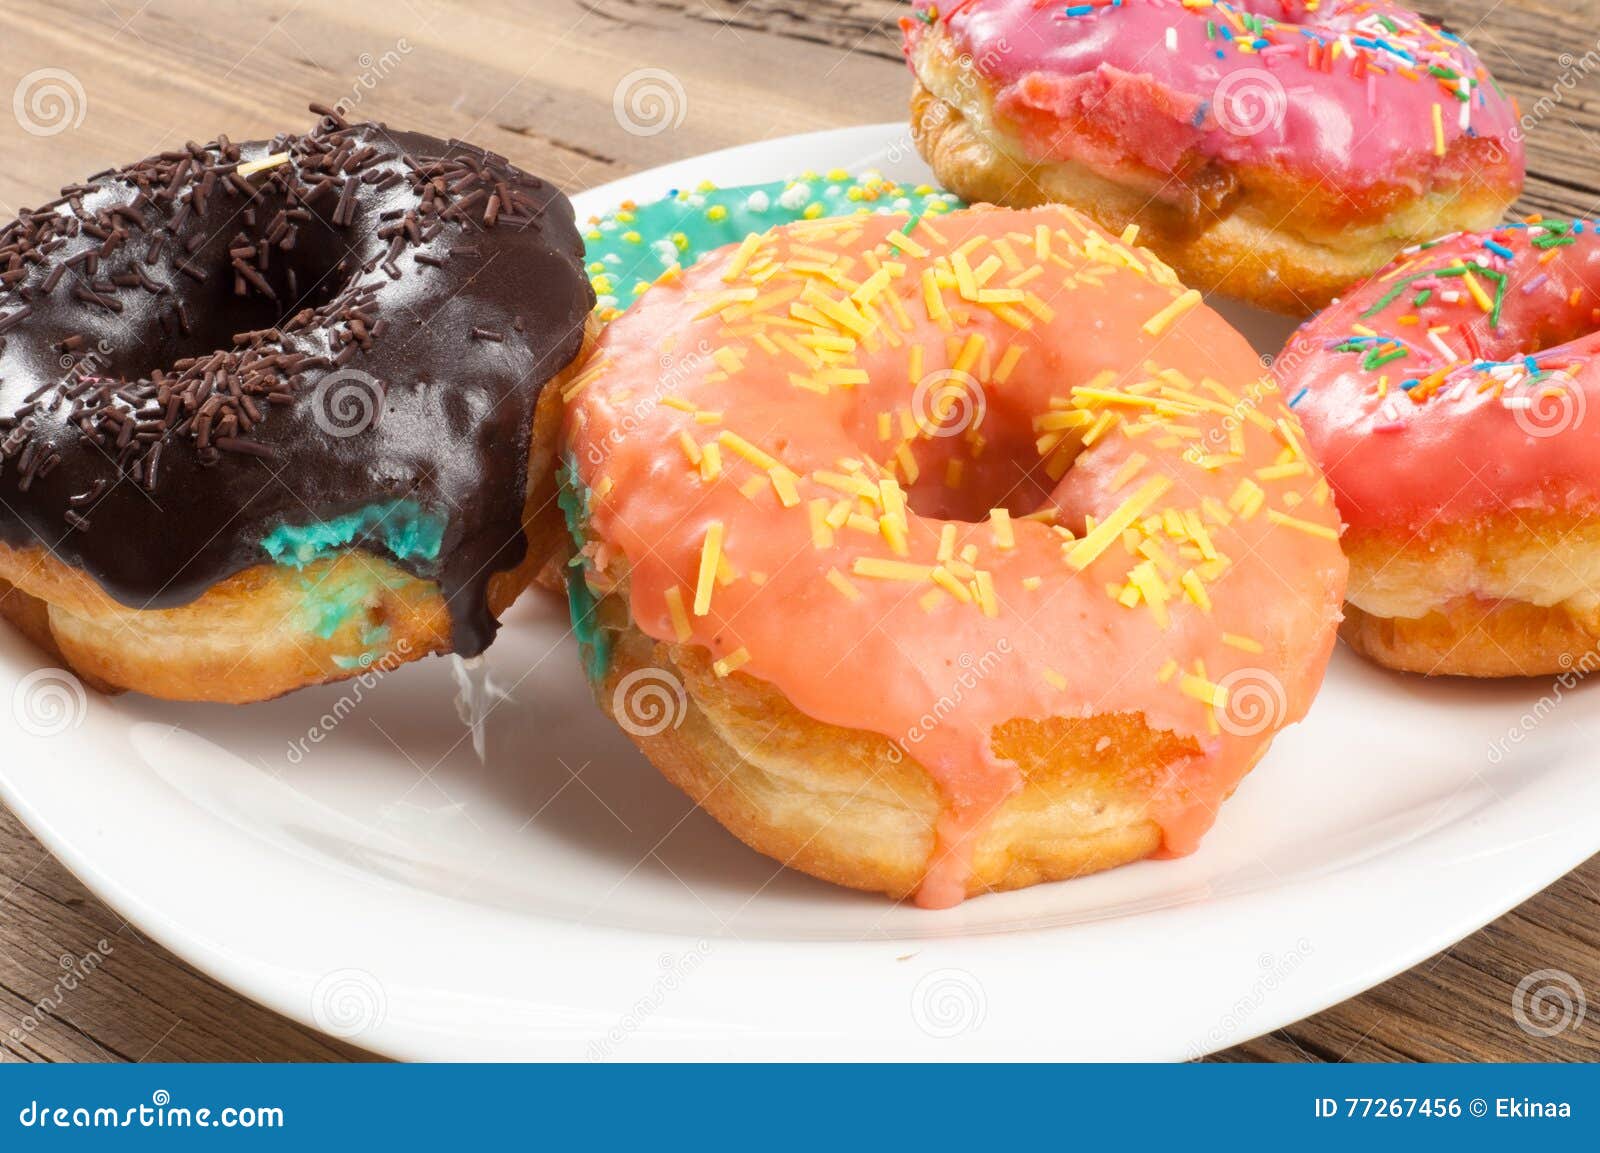 Donuts Round Fried In Fat Patty A Small Fried Cake Of Sweetene Stock